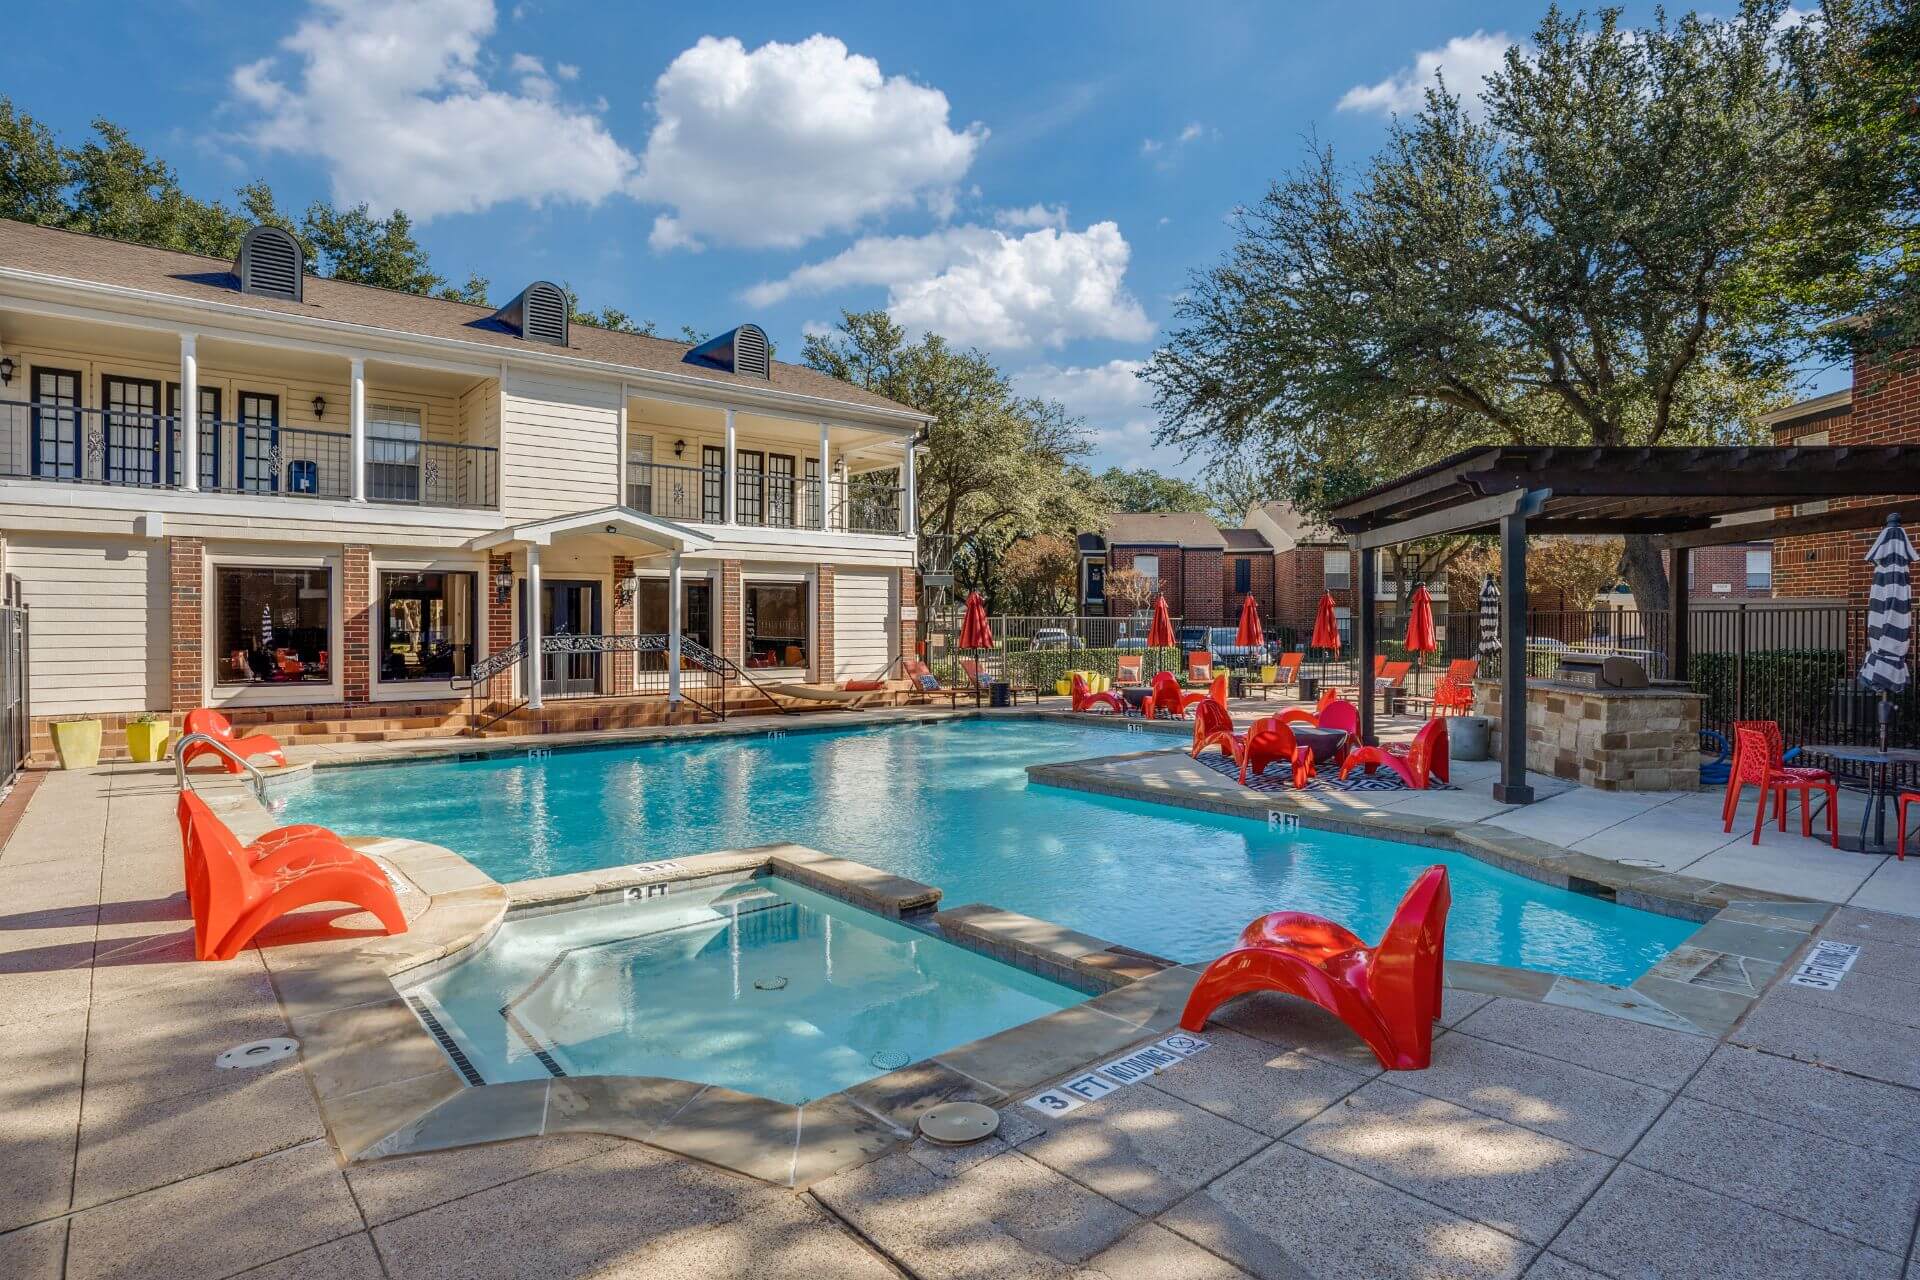 Cool off on a resort-style pool. Has access to clubhouse and grilling area